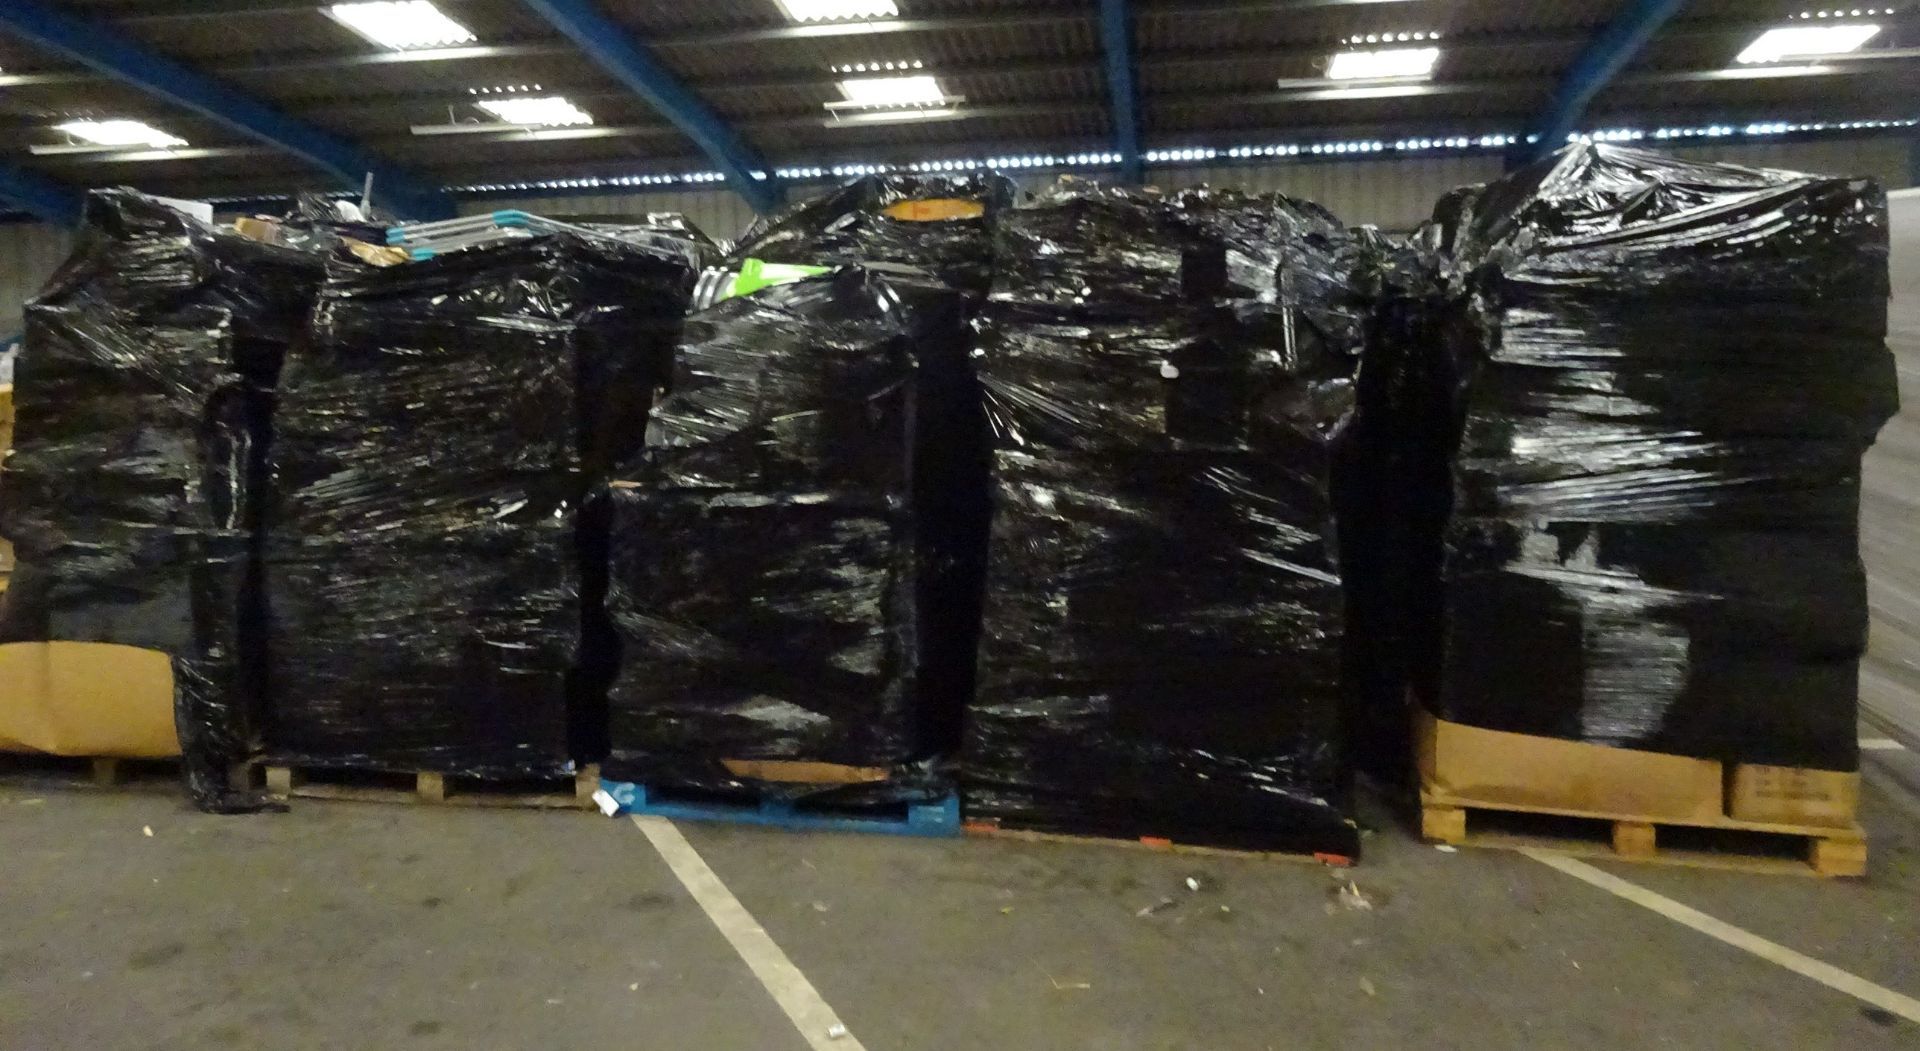 x1 LARGE PALLET FULL OF CUSTOMER RETURNS - EVERY PALLET IS DIFFERENT AND COULD CONTAIN TOOLS,